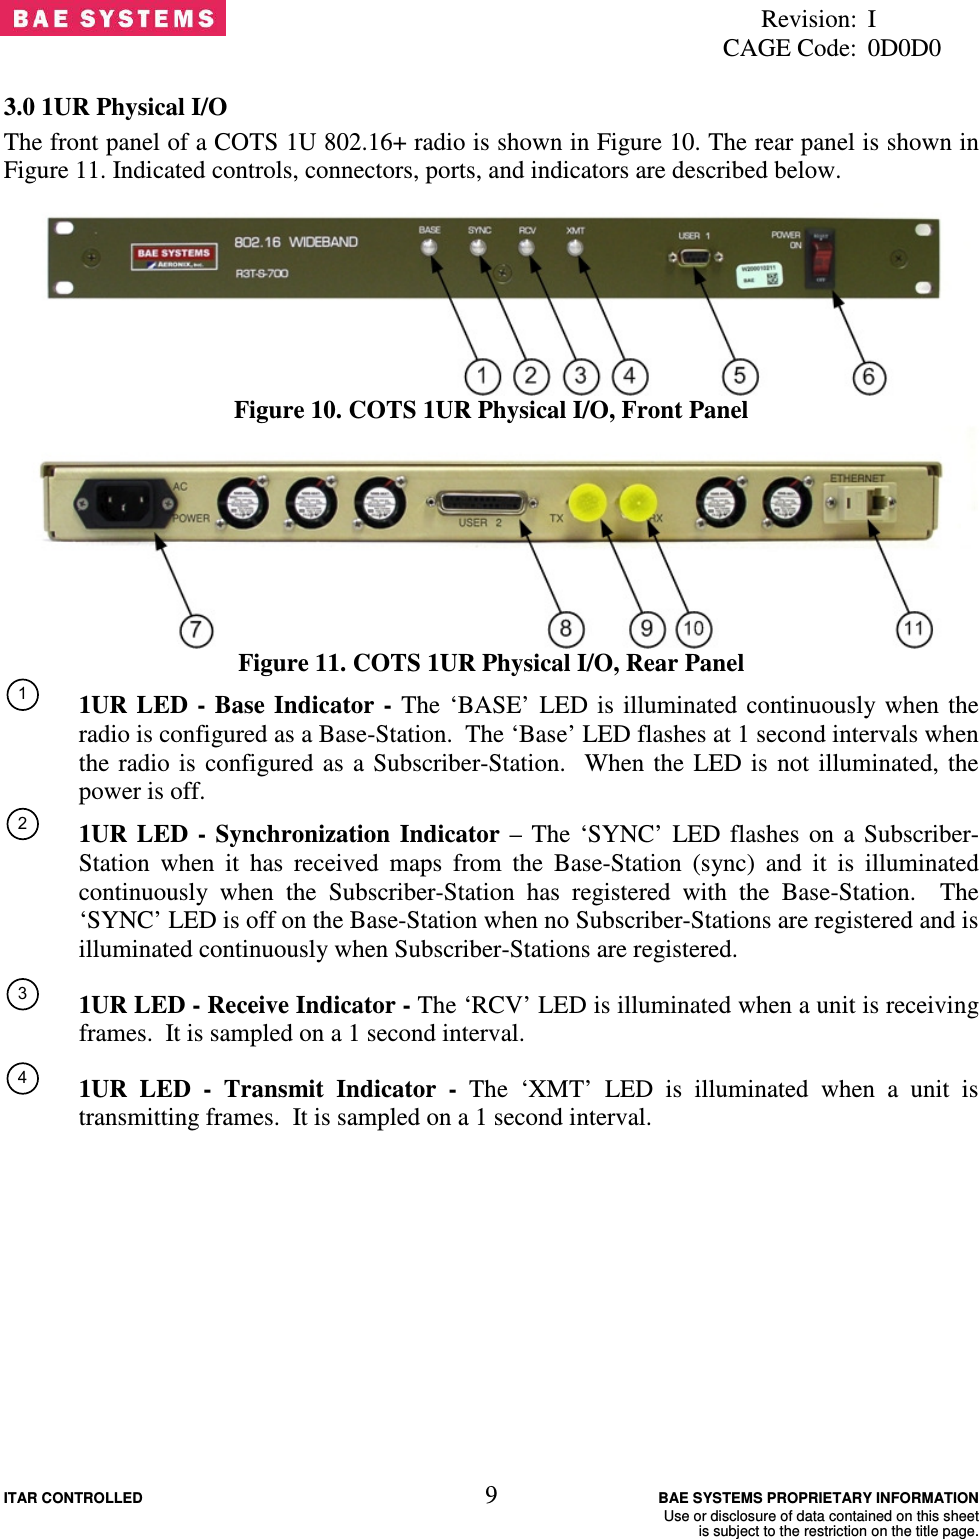   Revision:  I   CAGE Code:  0D0D0 ITAR CONTROLLED  9 BAE SYSTEMS PROPRIETARY INFORMATION     Use or disclosure of data contained on this sheet     is subject to the restriction on the title page. 3.0 1UR Physical I/O The front panel of a COTS 1U 802.16+ radio is shown in Figure 10. The rear panel is shown in Figure 11. Indicated controls, connectors, ports, and indicators are described below.  Figure 10. COTS 1UR Physical I/O, Front Panel  Figure 11. COTS 1UR Physical I/O, Rear Panel 1 1UR  LED  -  Base  Indicator  -  The  ‘BASE’  LED  is  illuminated  continuously when  the radio is configured as a Base-Station.  The ‘Base’ LED flashes at 1 second intervals when the  radio  is  configured  as  a  Subscriber-Station.    When  the  LED  is  not  illuminated,  the power is off. 2 1UR  LED  -  Synchronization  Indicator  –  The  ‘SYNC’  LED  flashes  on  a  Subscriber-Station  when  it  has  received  maps  from  the  Base-Station  (sync)  and  it  is  illuminated continuously  when  the  Subscriber-Station  has  registered  with  the  Base-Station.    The ‘SYNC’ LED is off on the Base-Station when no Subscriber-Stations are registered and is illuminated continuously when Subscriber-Stations are registered. 3  1UR LED - Receive Indicator - The ‘RCV’ LED is illuminated when a unit is receiving frames.  It is sampled on a 1 second interval. 4 1UR  LED  -  Transmit  Indicator  -  The  ‘XMT’  LED  is  illuminated  when  a  unit  is transmitting frames.  It is sampled on a 1 second interval. 